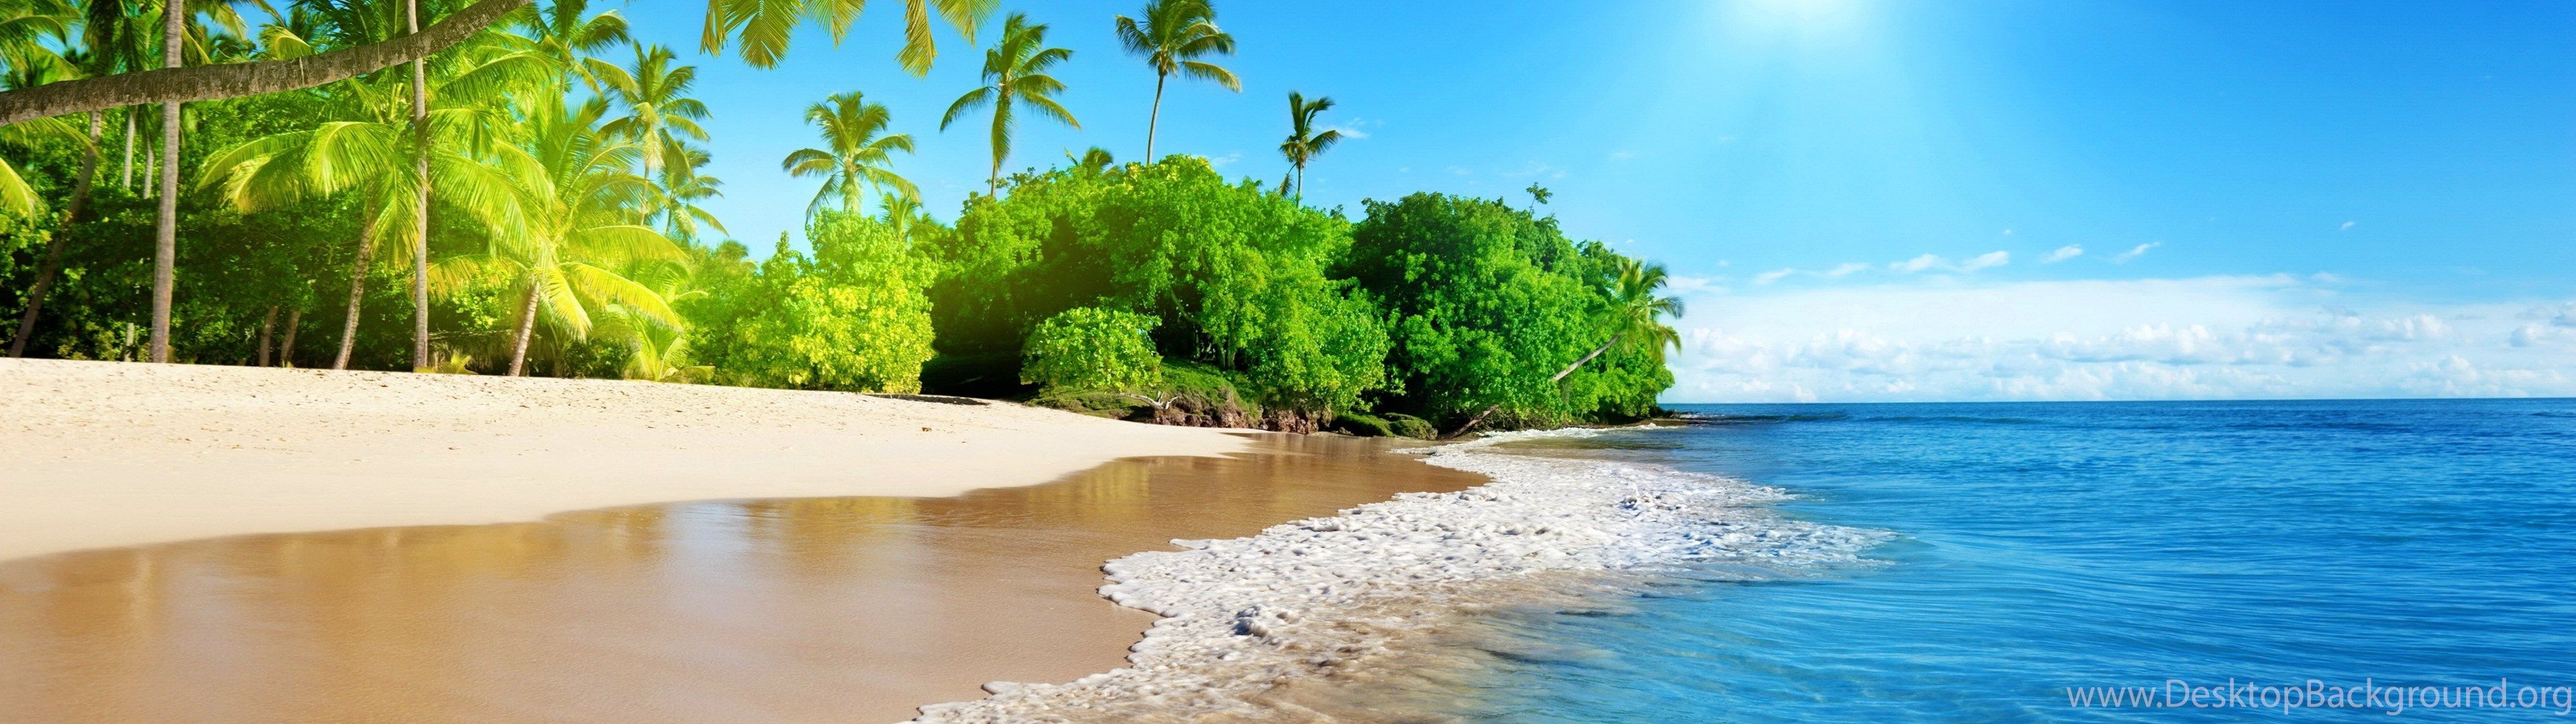 3840X1080 Hd Nature Wallpapers